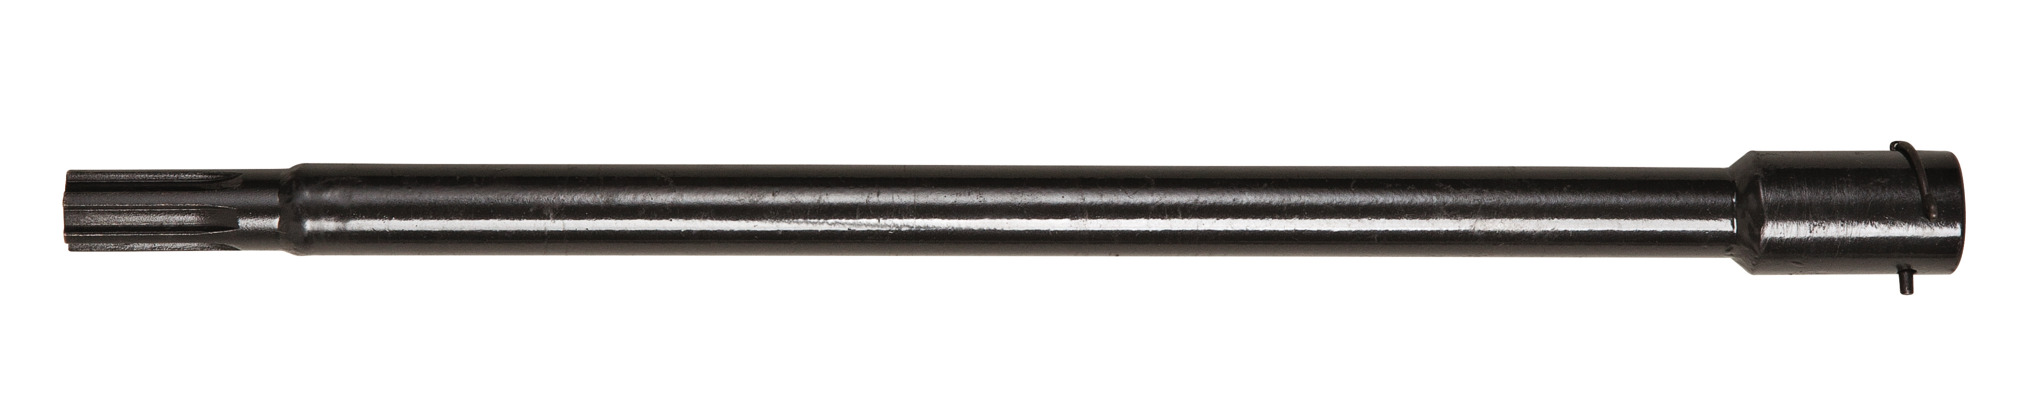 Shaft extension lengthens for the earth auger.